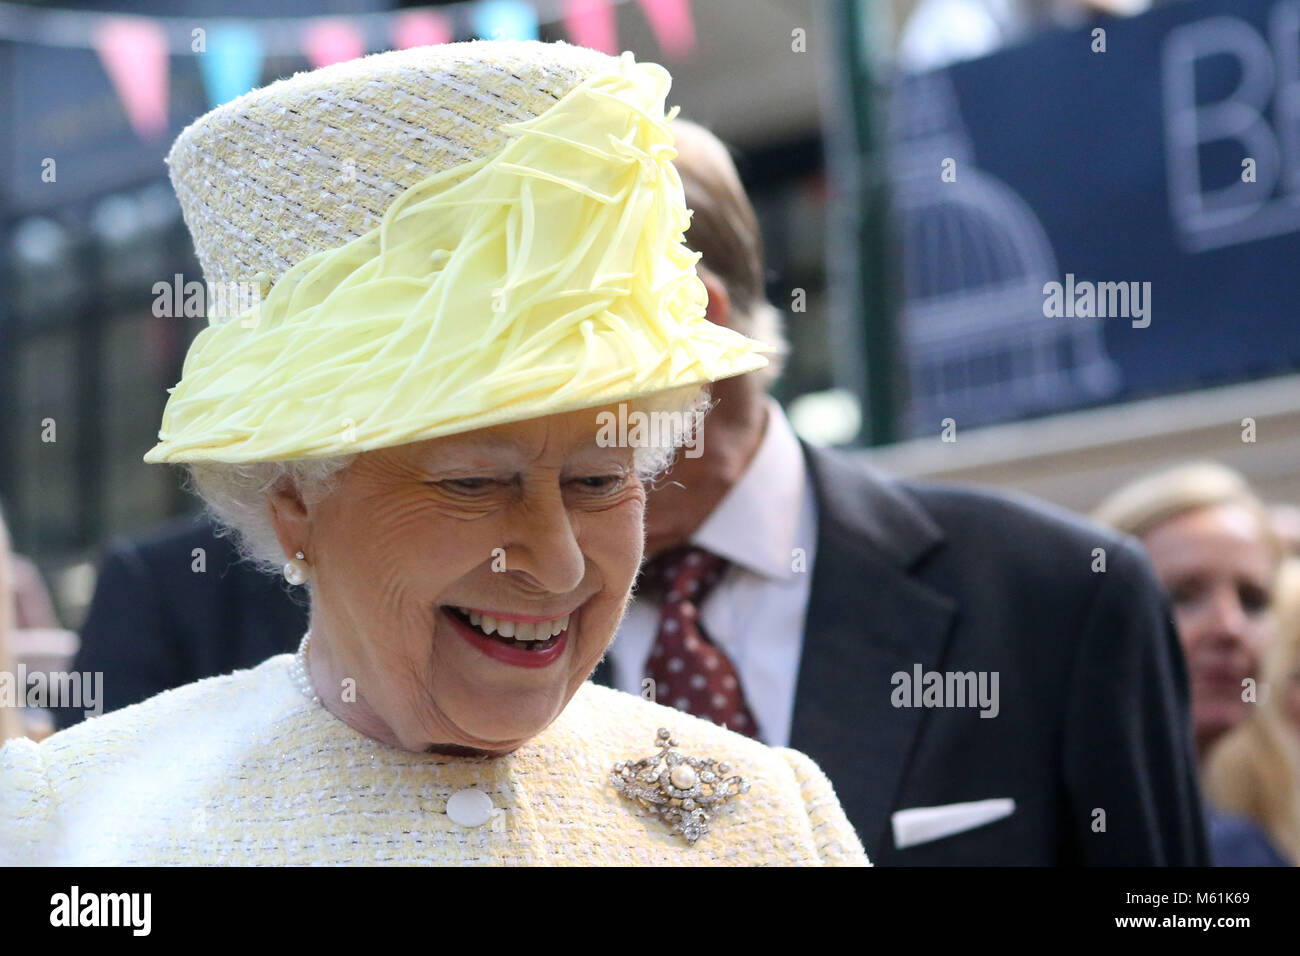 Britain's Queen Elizabeth II and the Duke of Edinburgh tours St.Georges Market in Belfast, Tuesday June 24th, 2014. The Queen is on a 3 day tour of Northern Ireland. POOL Photo/Paul McErlane Stock Photo